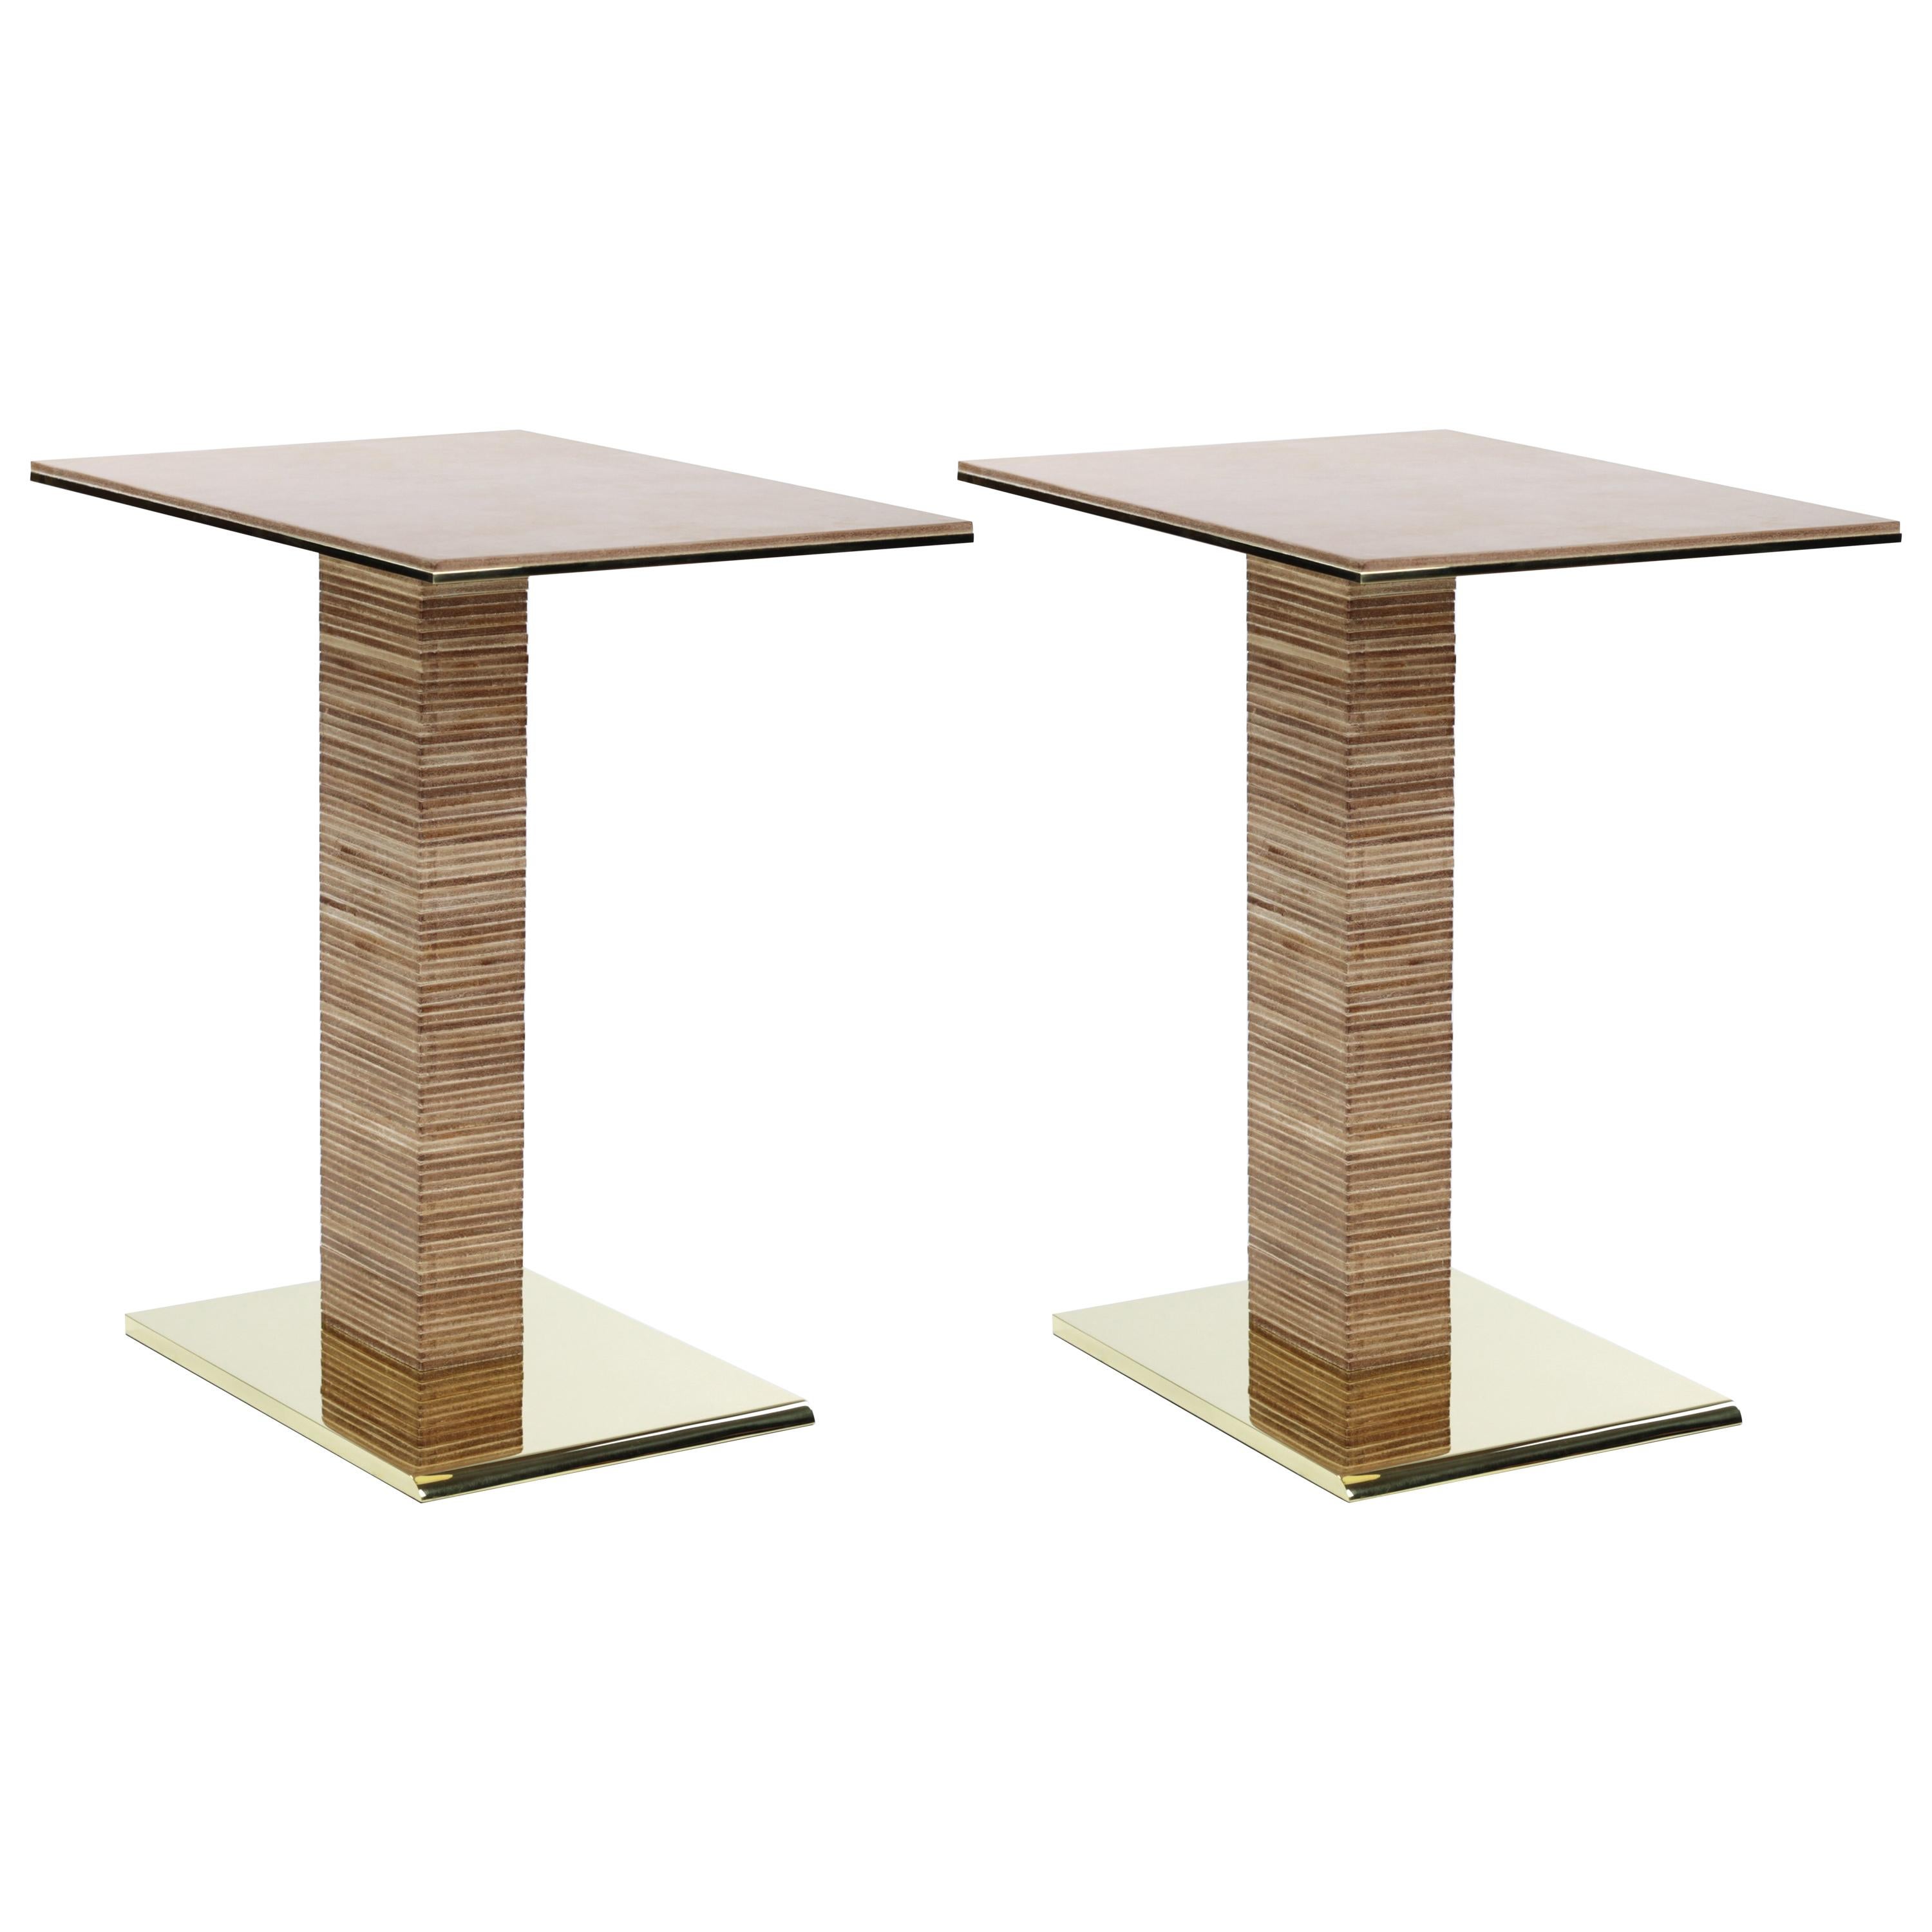 Pair of Cantilever Infinity Side Tables in brass by Christopher Kreiling